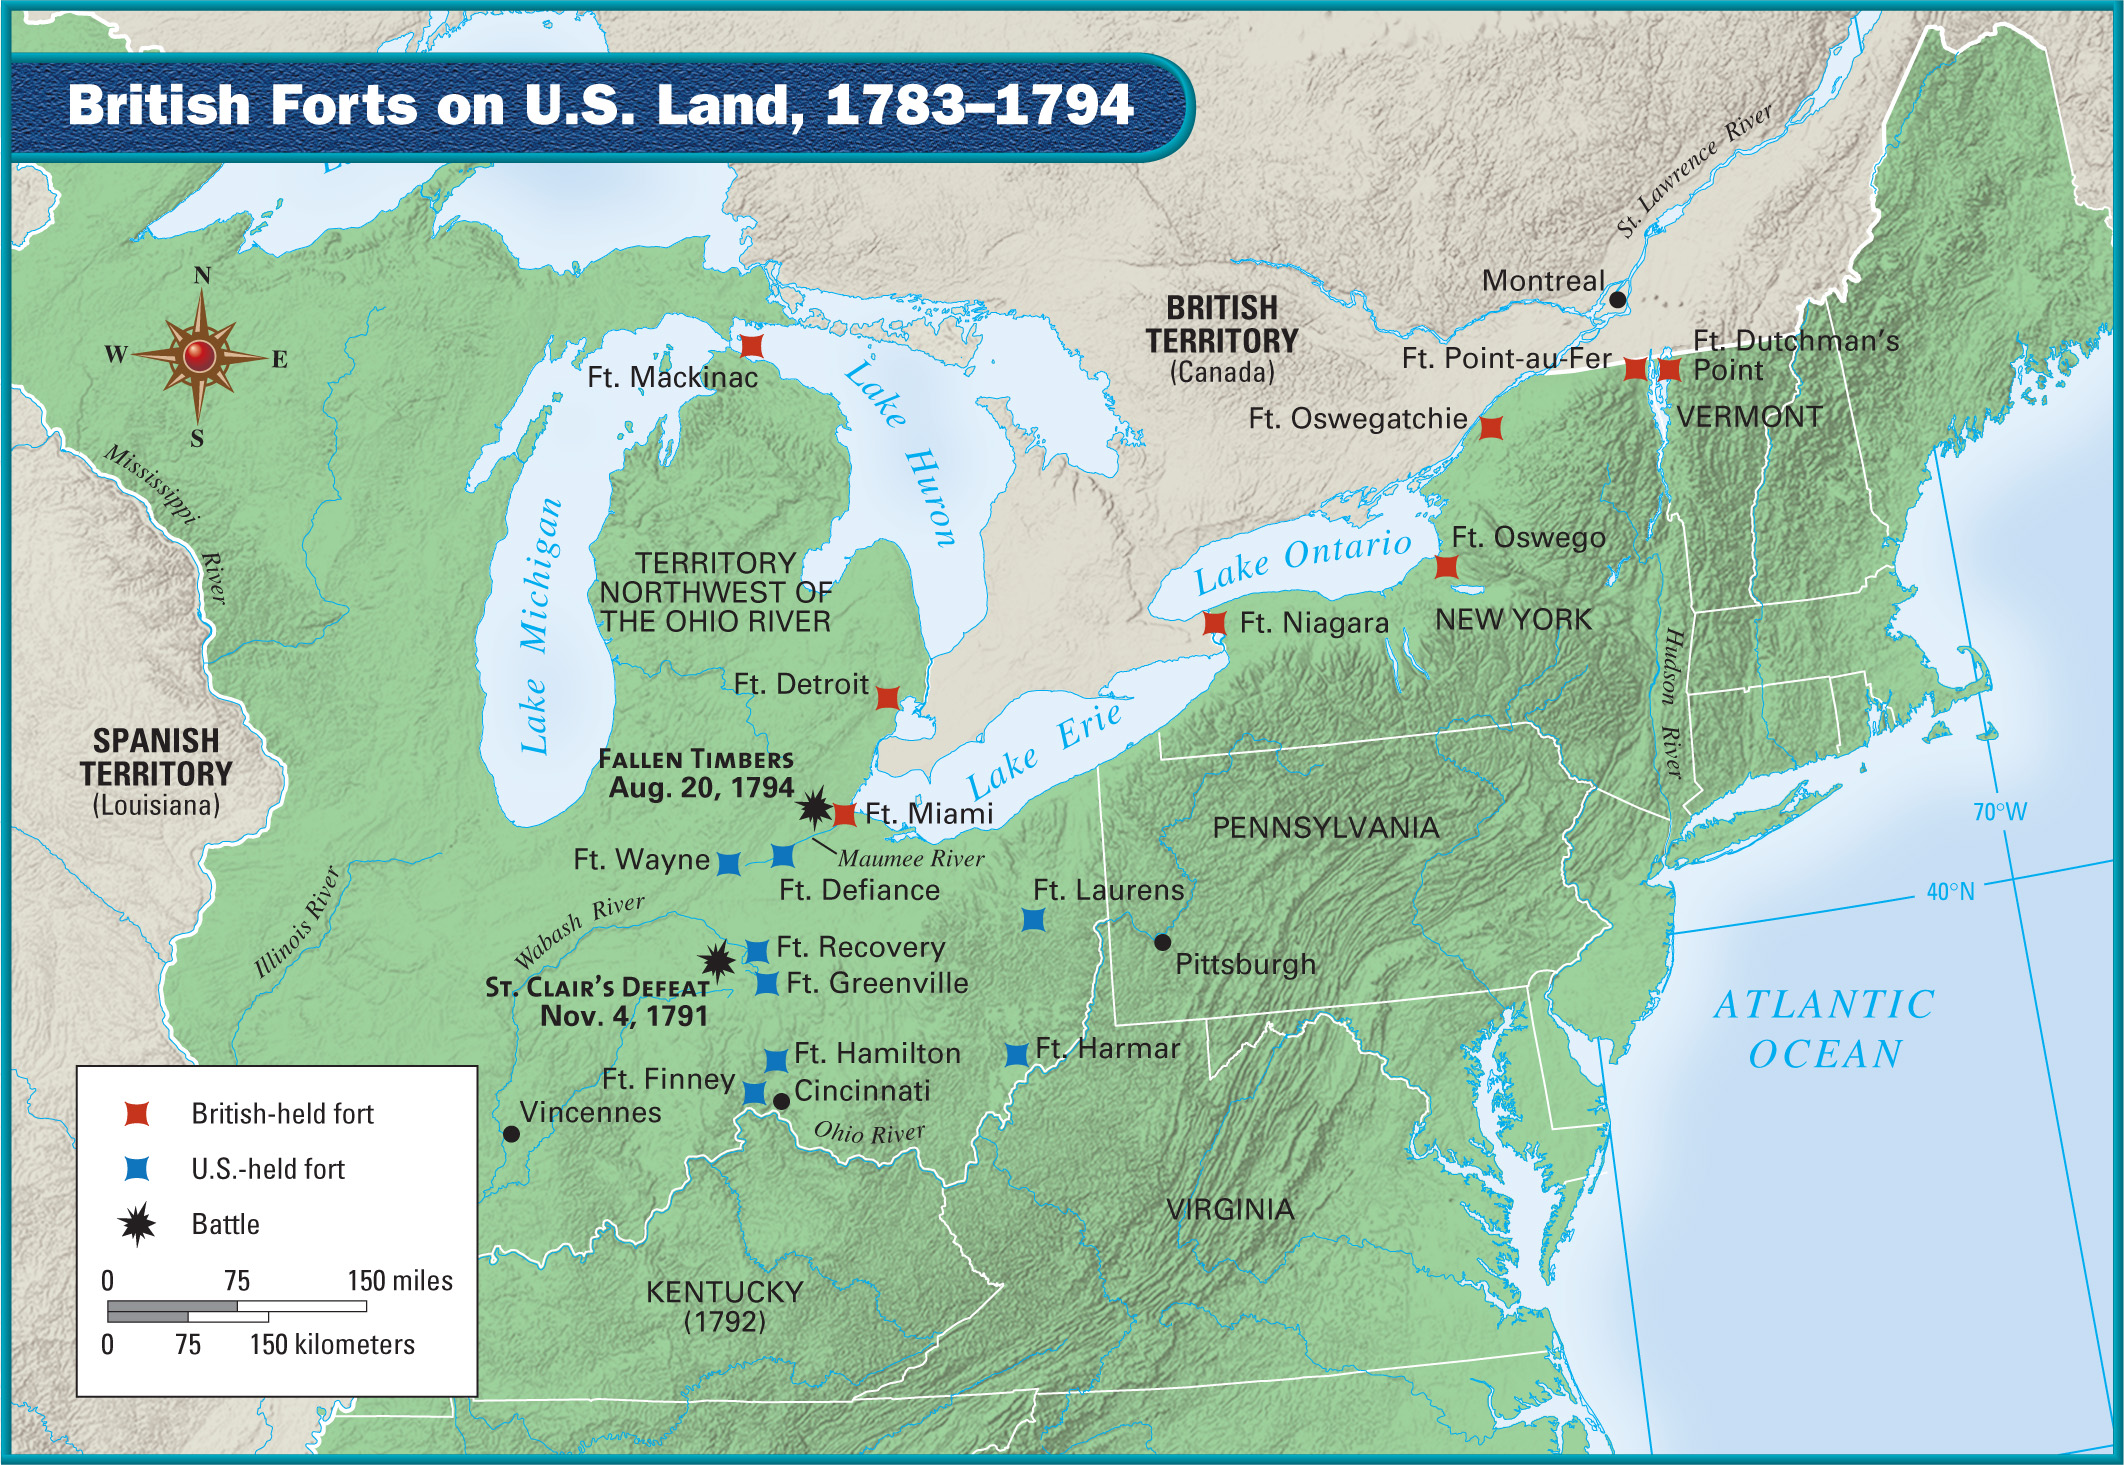 A map shows
British forts on U.S. land, 1783-1794.